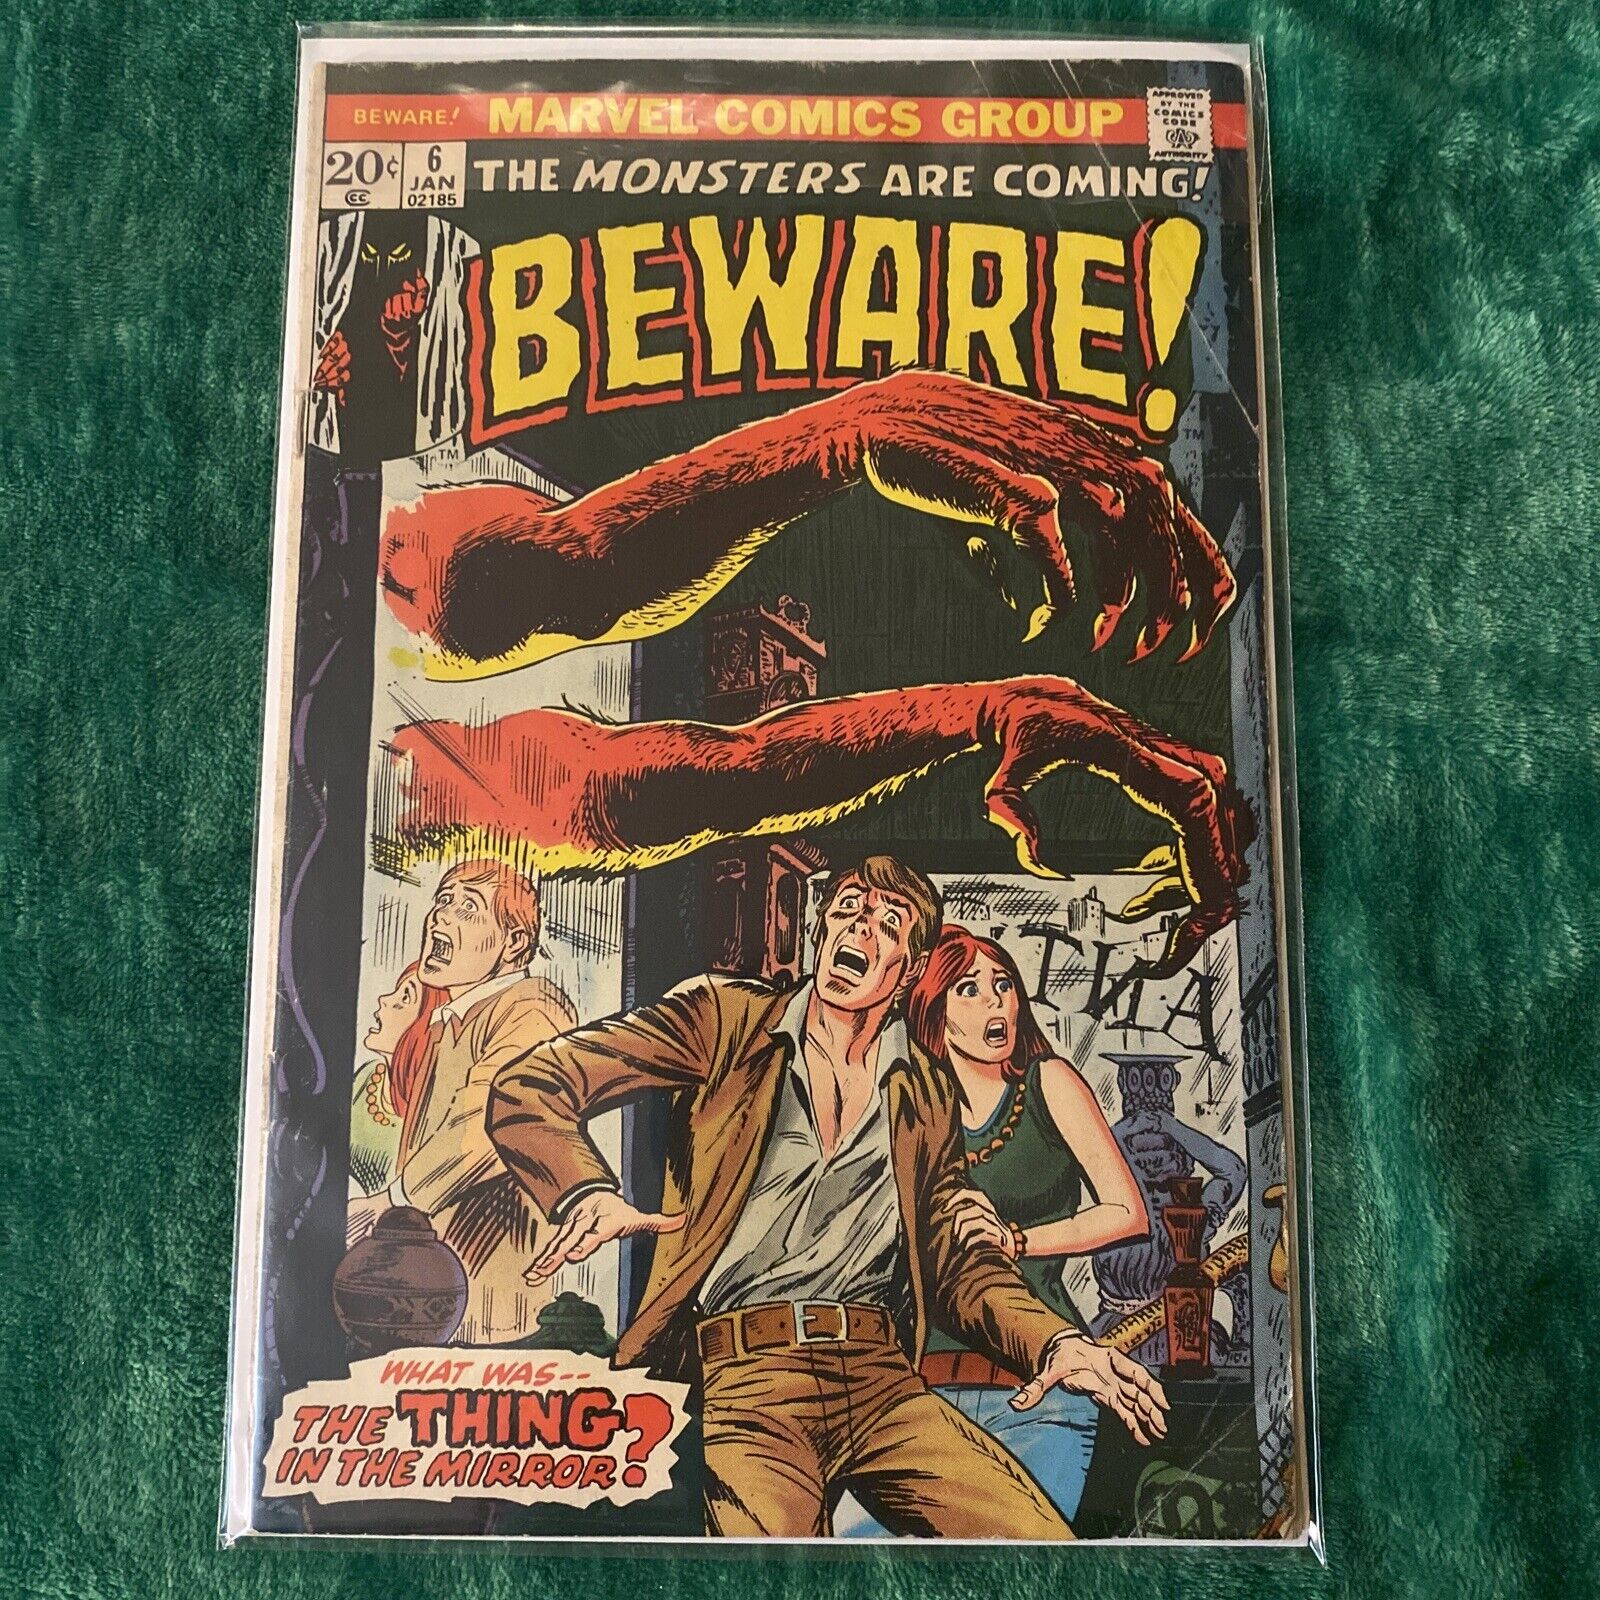 MARVEL Comic Beware The Monsters Are Coming Vol 1 # 6 BRONZE AGE Vintage 1974.